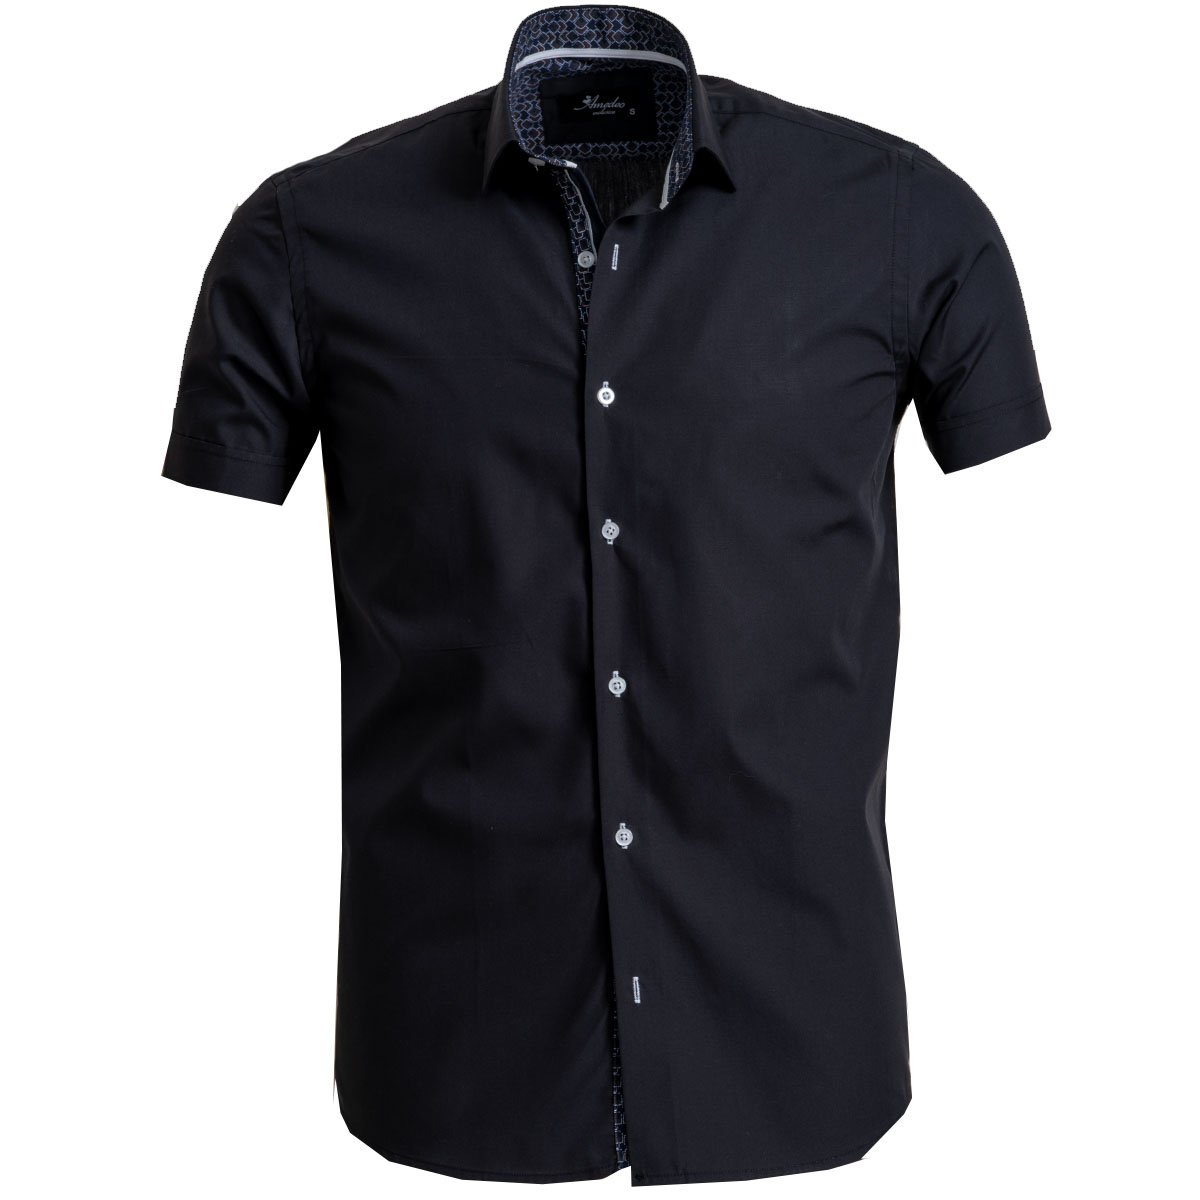 Men's Button down Tailor Fit Soft 100% Cotton Short Sleeve Dress Shirt Solid Black casual And Formal - Amedeo Exclusive